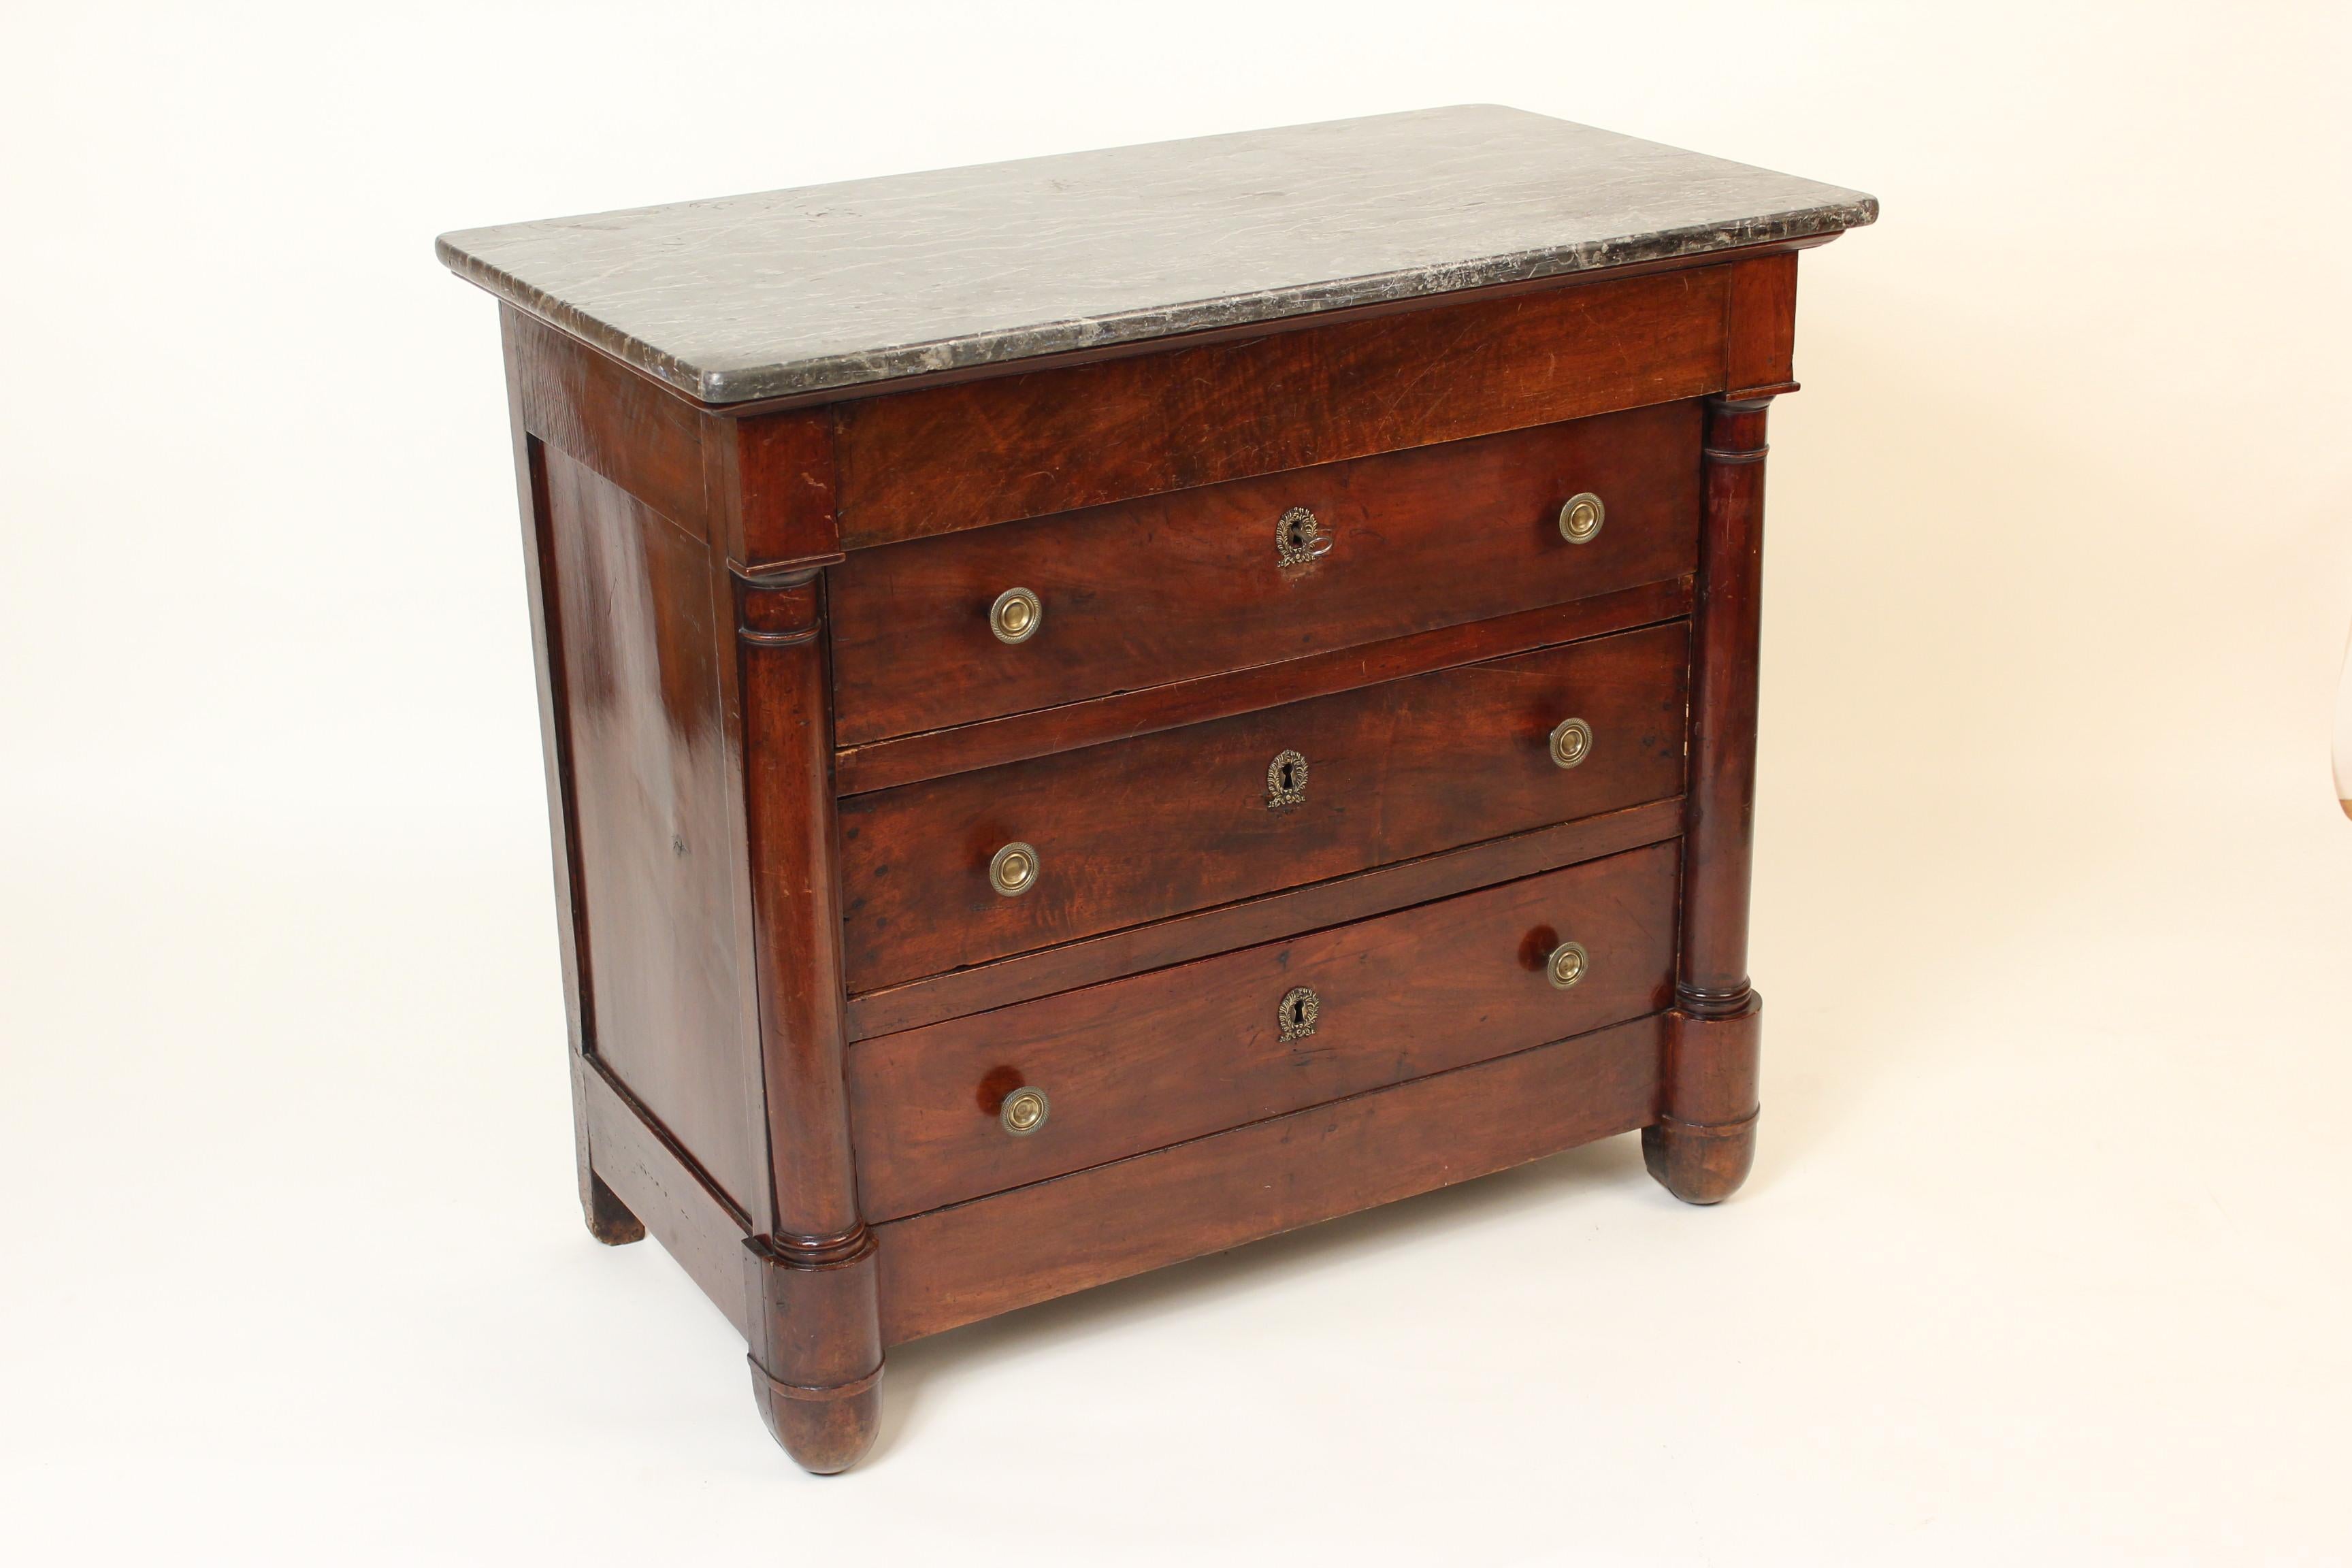 European Period Empire Chest of Drawers